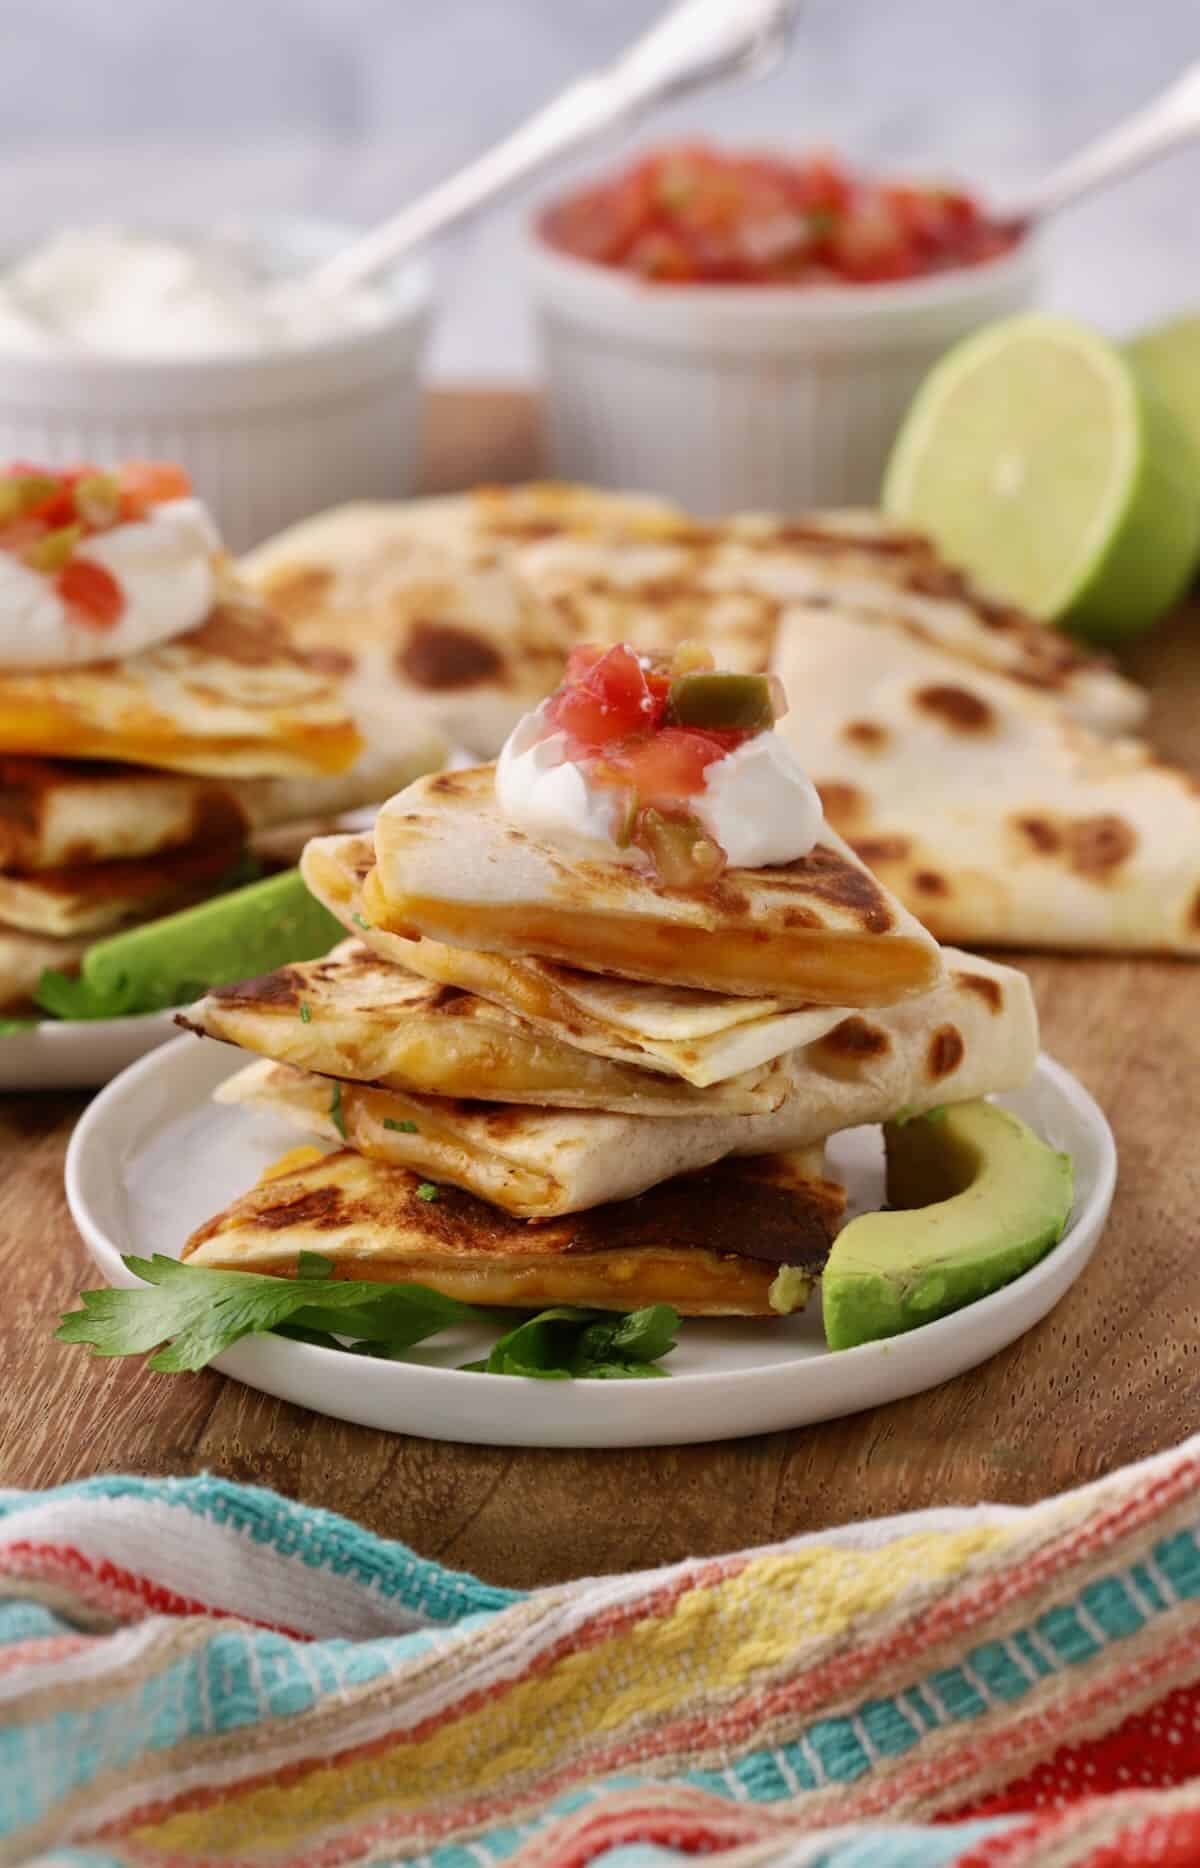 A stack of quesadillas topped with sour cream and salsa.